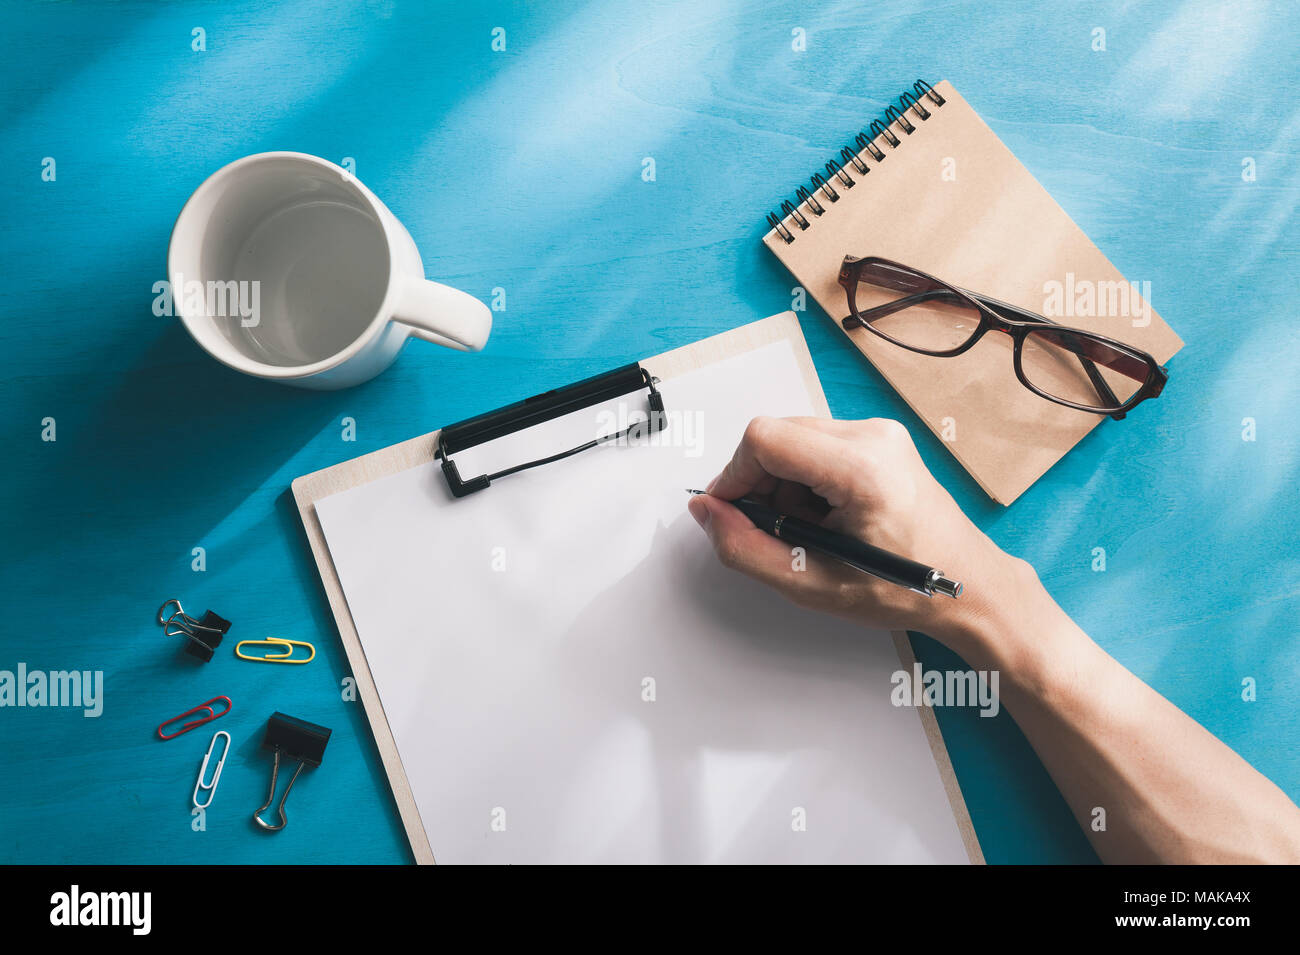 Young Asian male hand writing on white paper on a4 size clipboard on blue wood table in workplace. freelance worker lifestyle concept Stock Photo